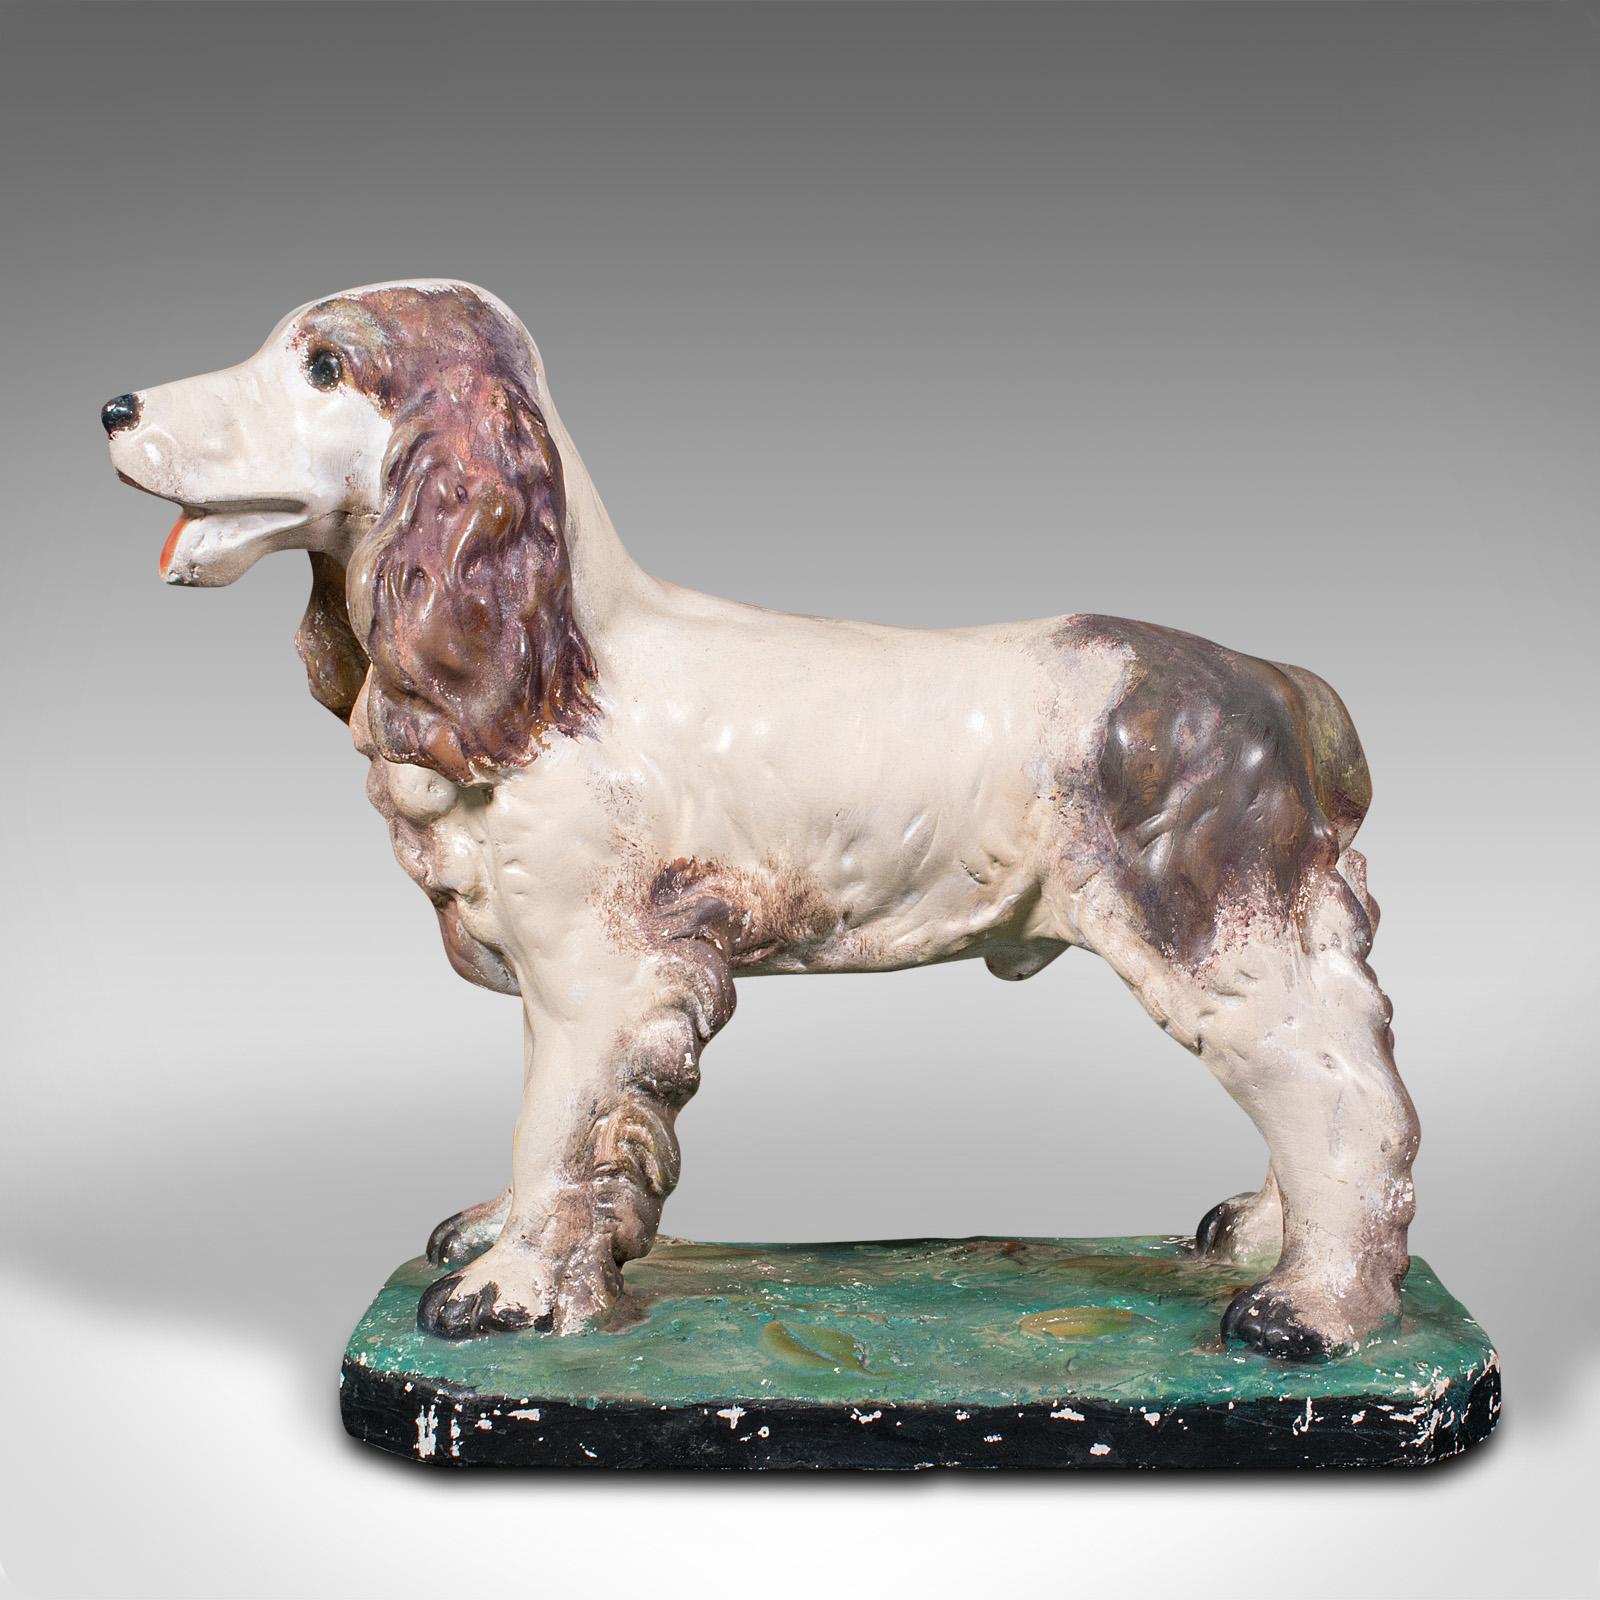 This is a large antique Cocker Spaniel figure. An English, plaster dog statue, dating to the Edwardian period, circa 1910.

Of great proportion and endearing, sure to add character to any room
Displays a desirable aged patina and in good original